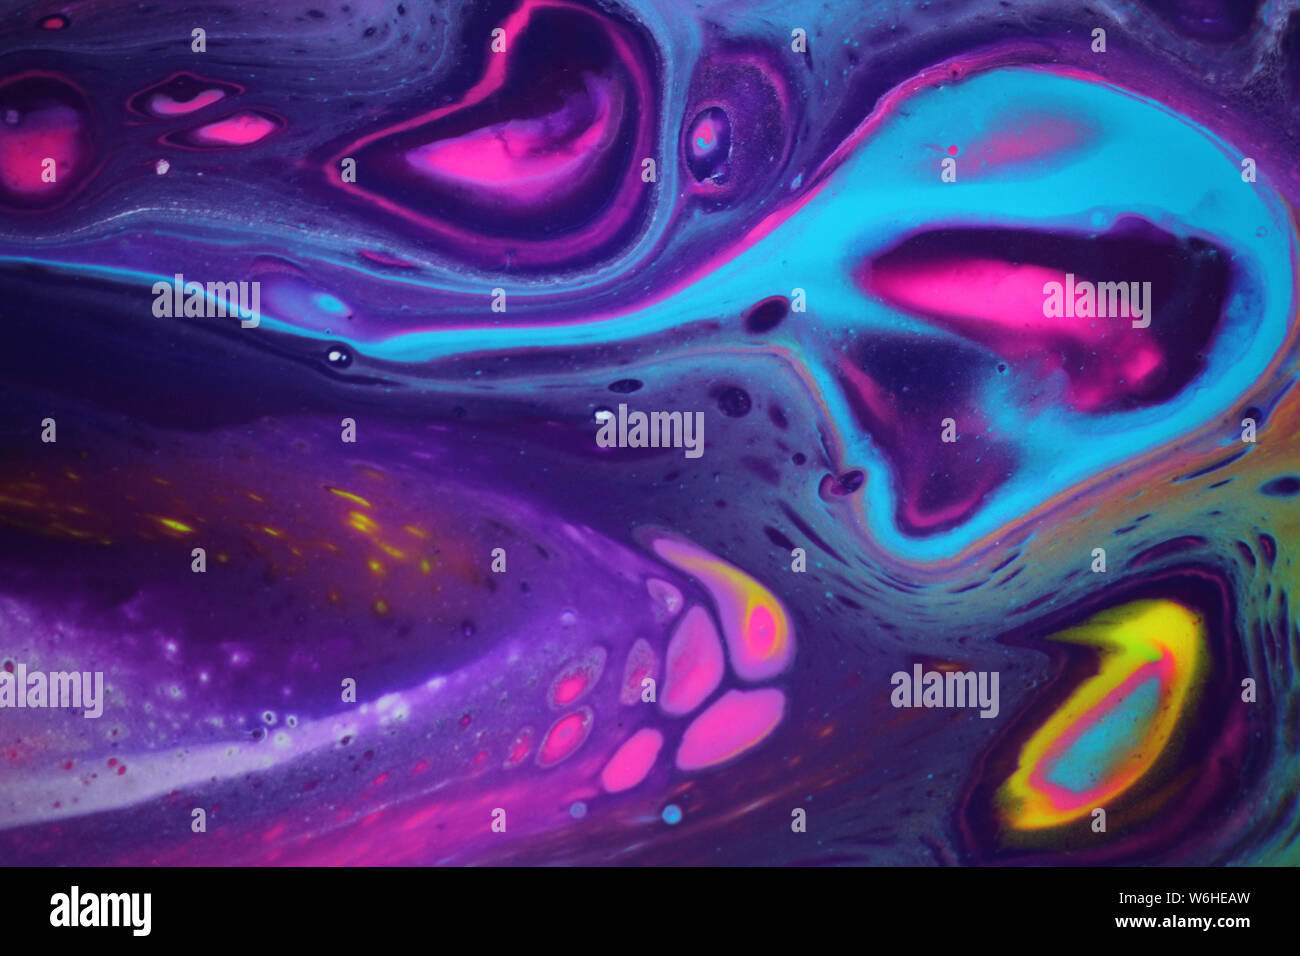 Abstract acrylic pour painting for backgrounds that features bright neon colors as well as dark purple for contrast, and has a cosmic feel. Stock Photo